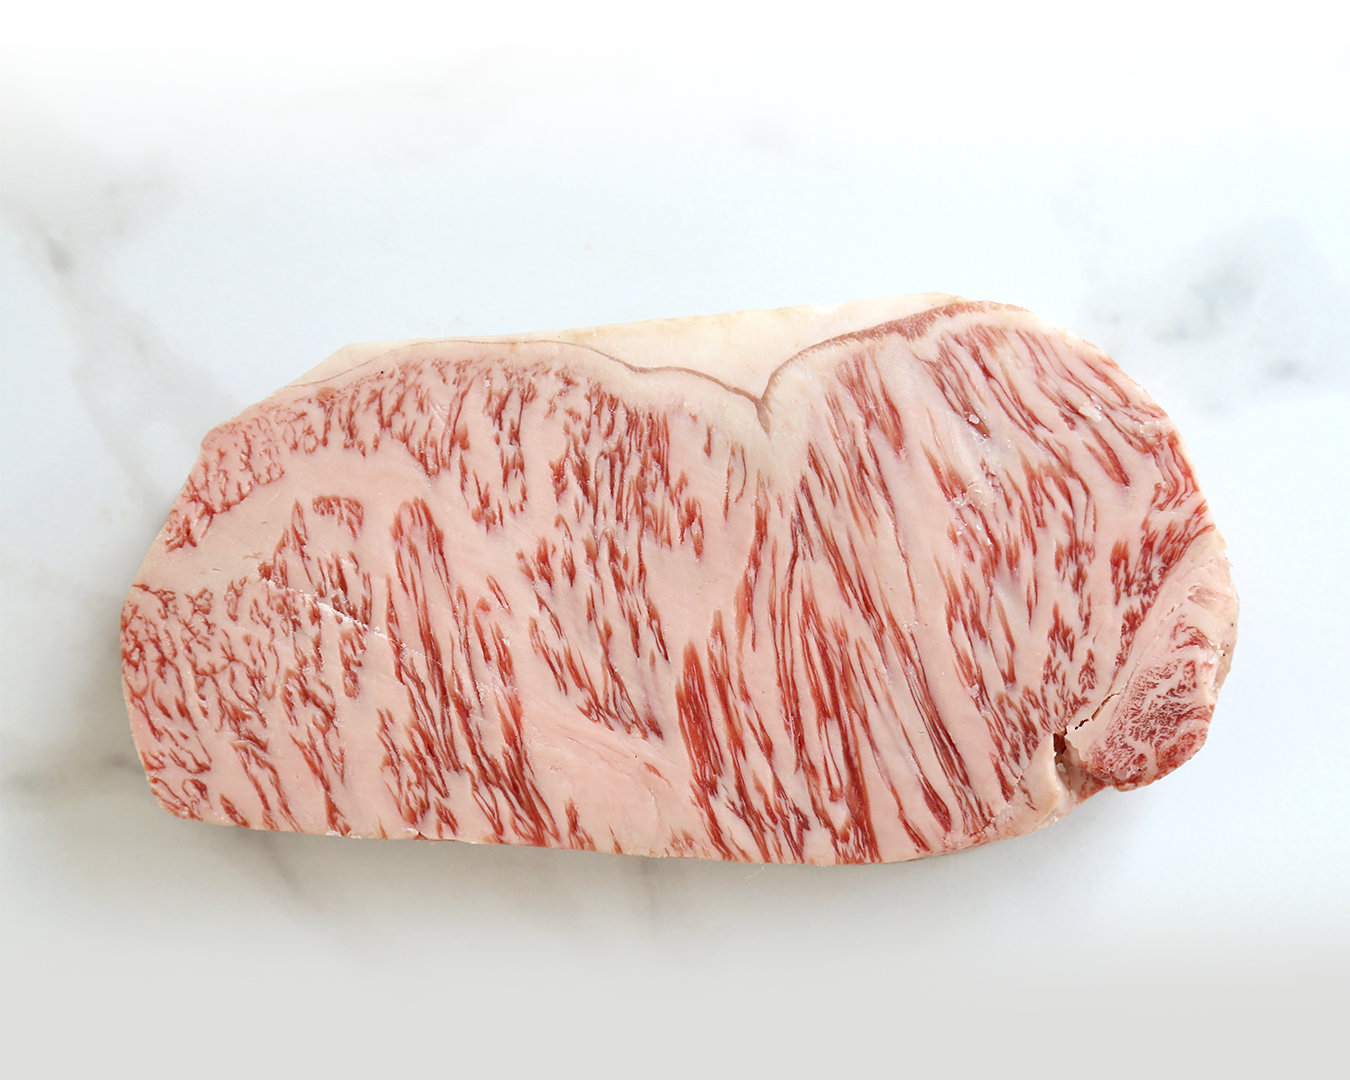 What Is Wagyu Beef?